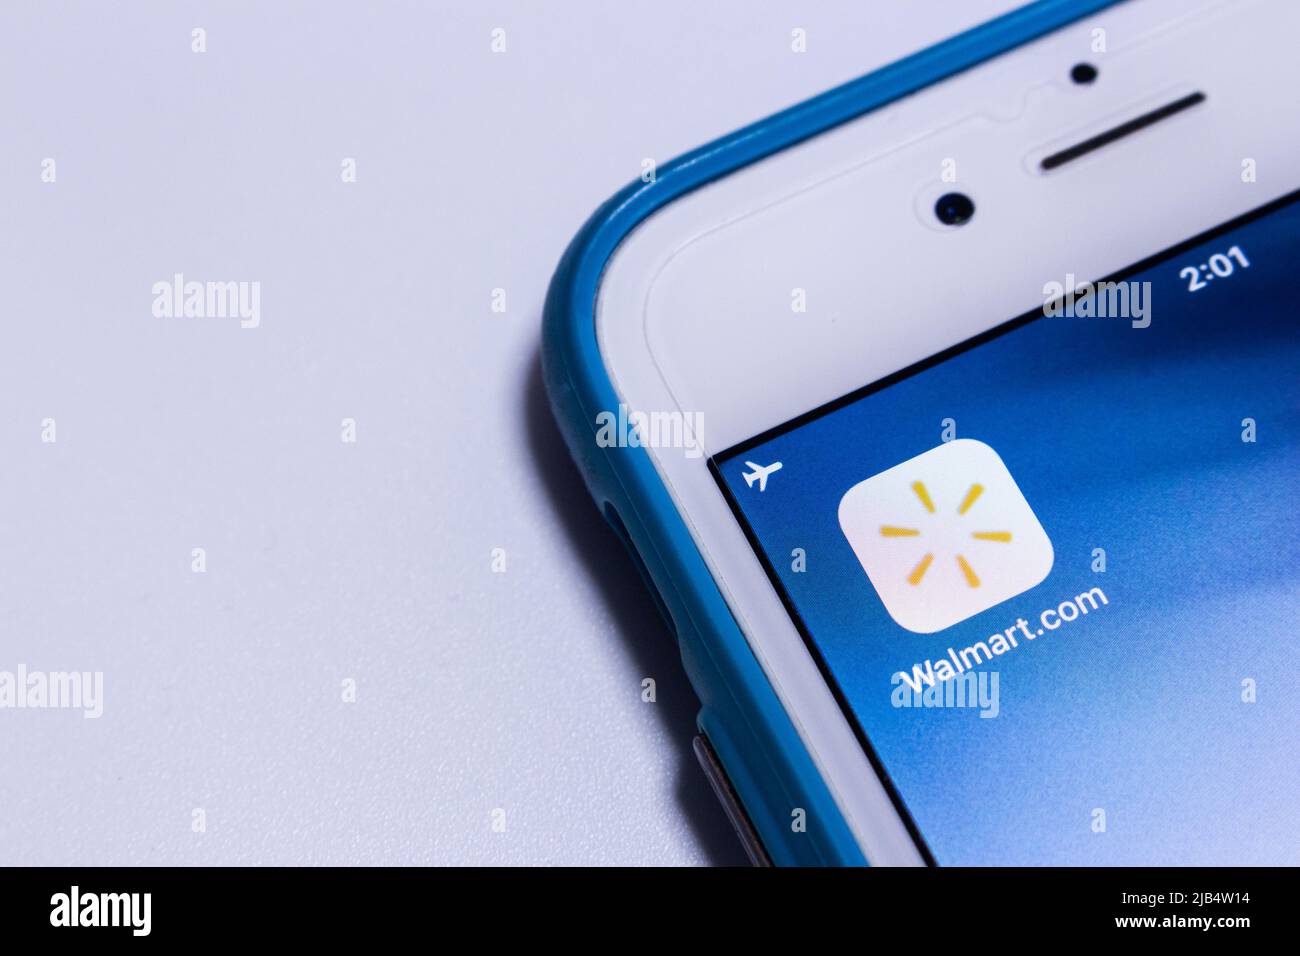 Walmart app on an iPhone. Walmart Inc. is an US retail company that operates a chain of hypermarkets, discount & grocery stores, based in Arkansas Stock Photo